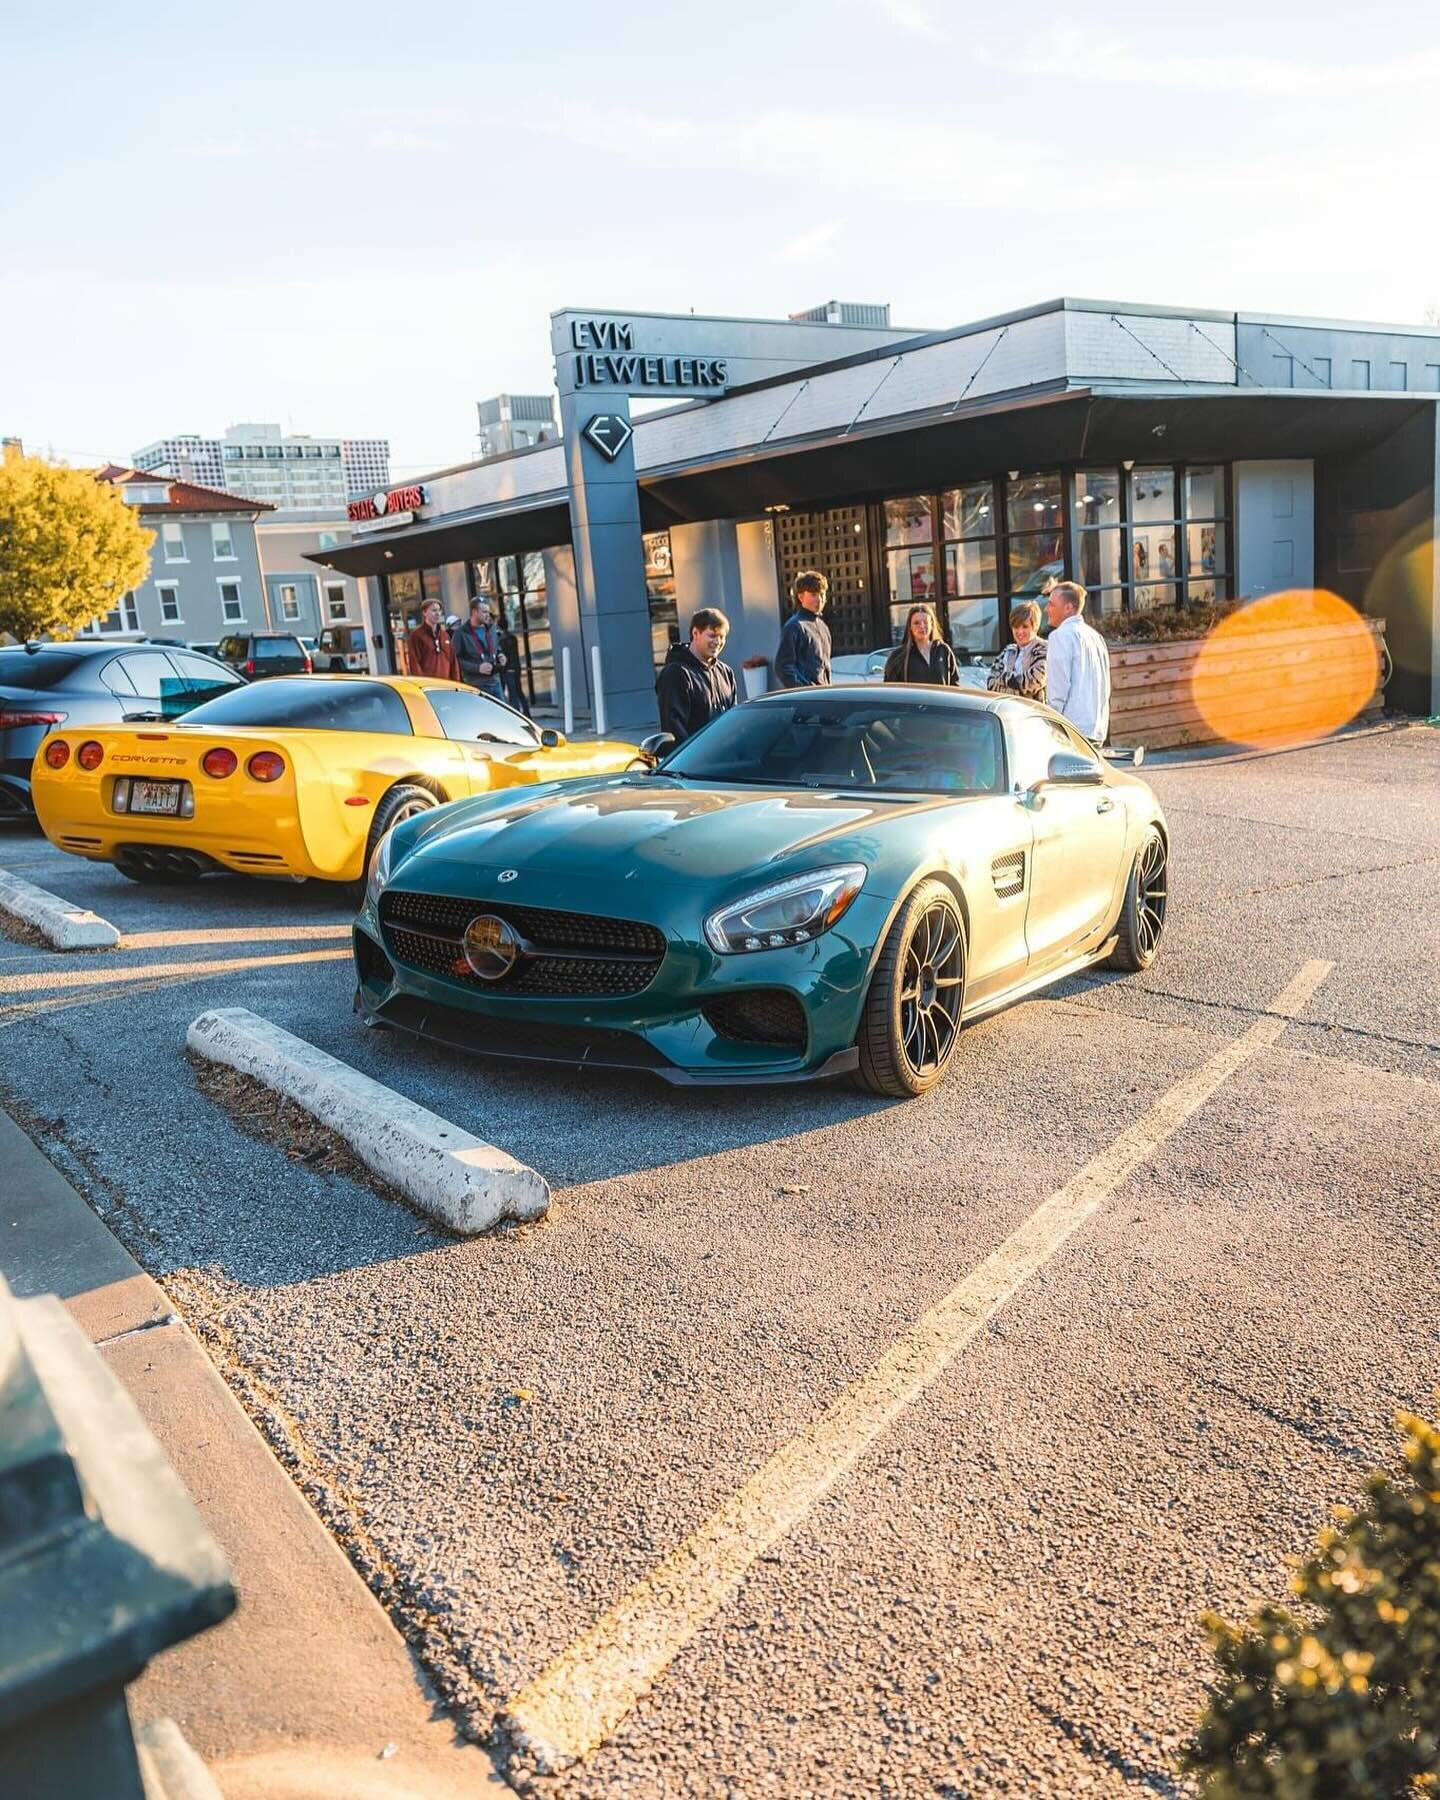 Thanks to everyone that joined us for Cars &amp; Carats at @evmjewelers on Thursday night - it was the perfect way to kickoff the 2024 season of events!

📷: @rgm_edia 

#expressrally #driversonly #evmjewelers #fayetteville #besocial #carcommunity #n